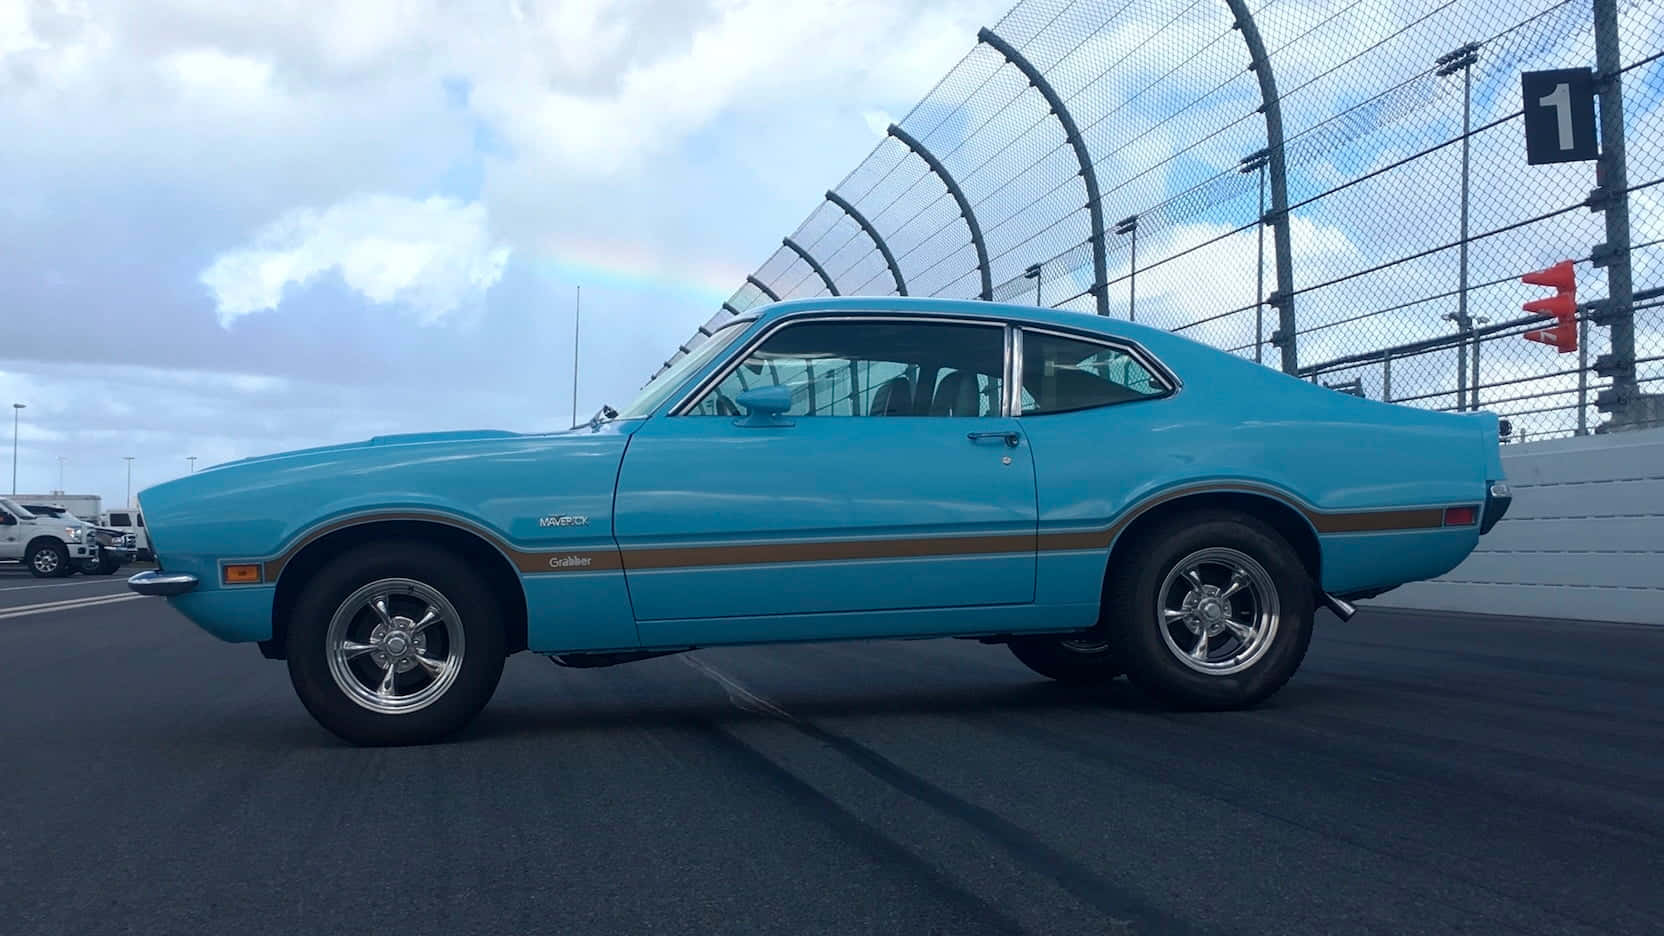 A Blue Muscle Car Is Parked On A Race Track